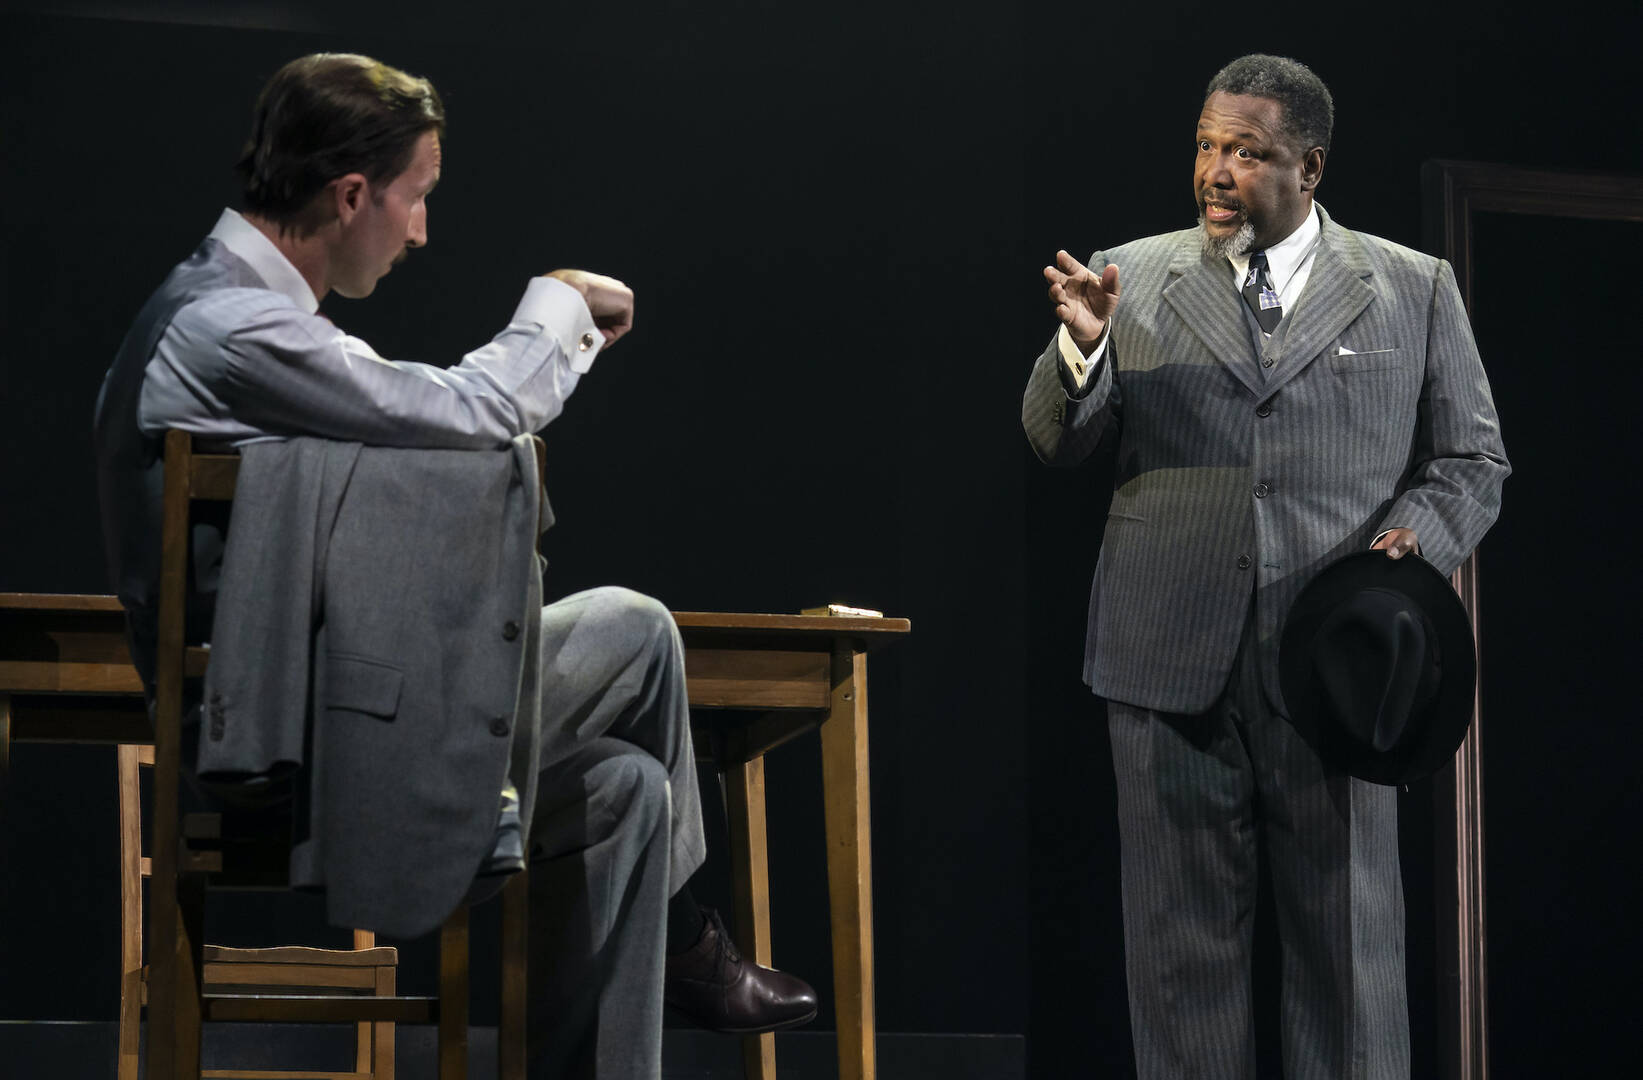 Blake DeLong and Wendell Pierce in “Death of a Salesman” (photo: Joan Marcus)